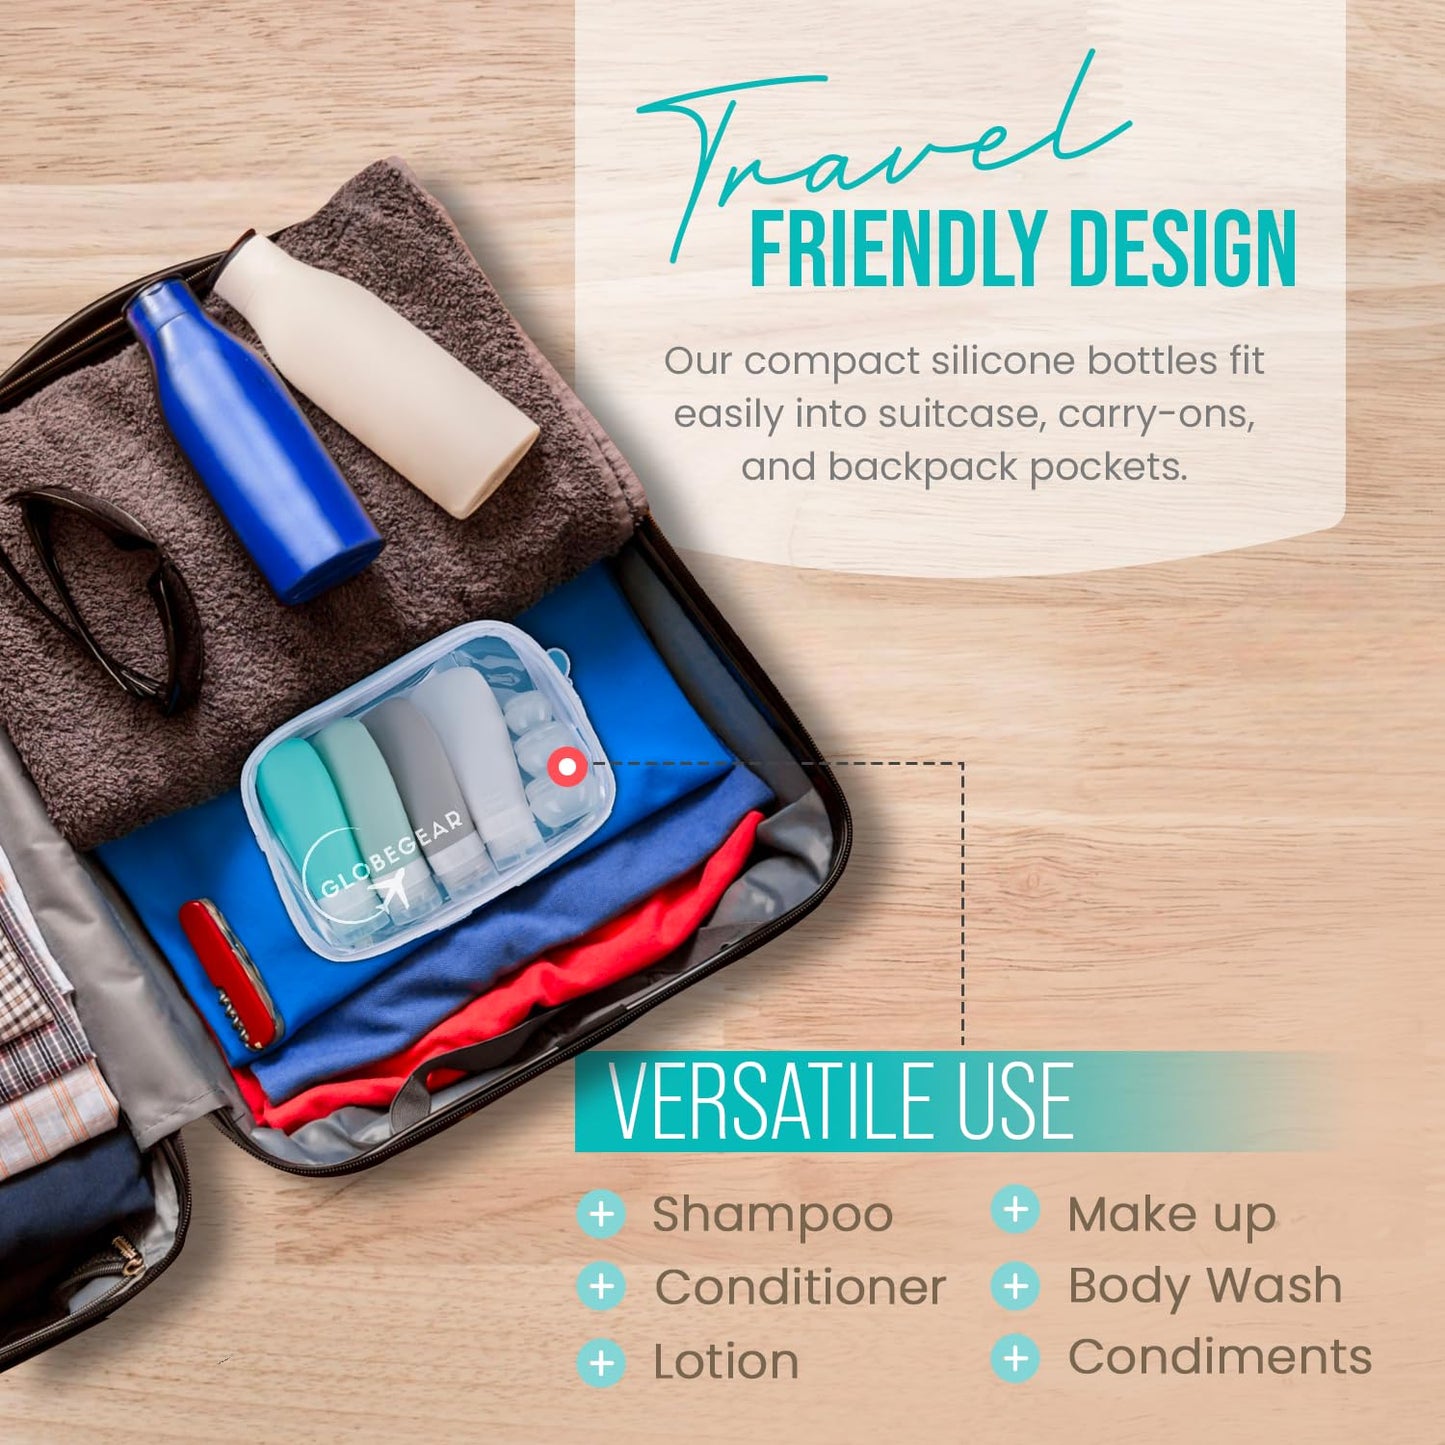 GLOBEGEAR TSA Approved Silicone Travel Bottles Leak Proof & Travel Size Containers for Toiletries Travel Kit with TSA Liquids Travel Bag (model GG3)